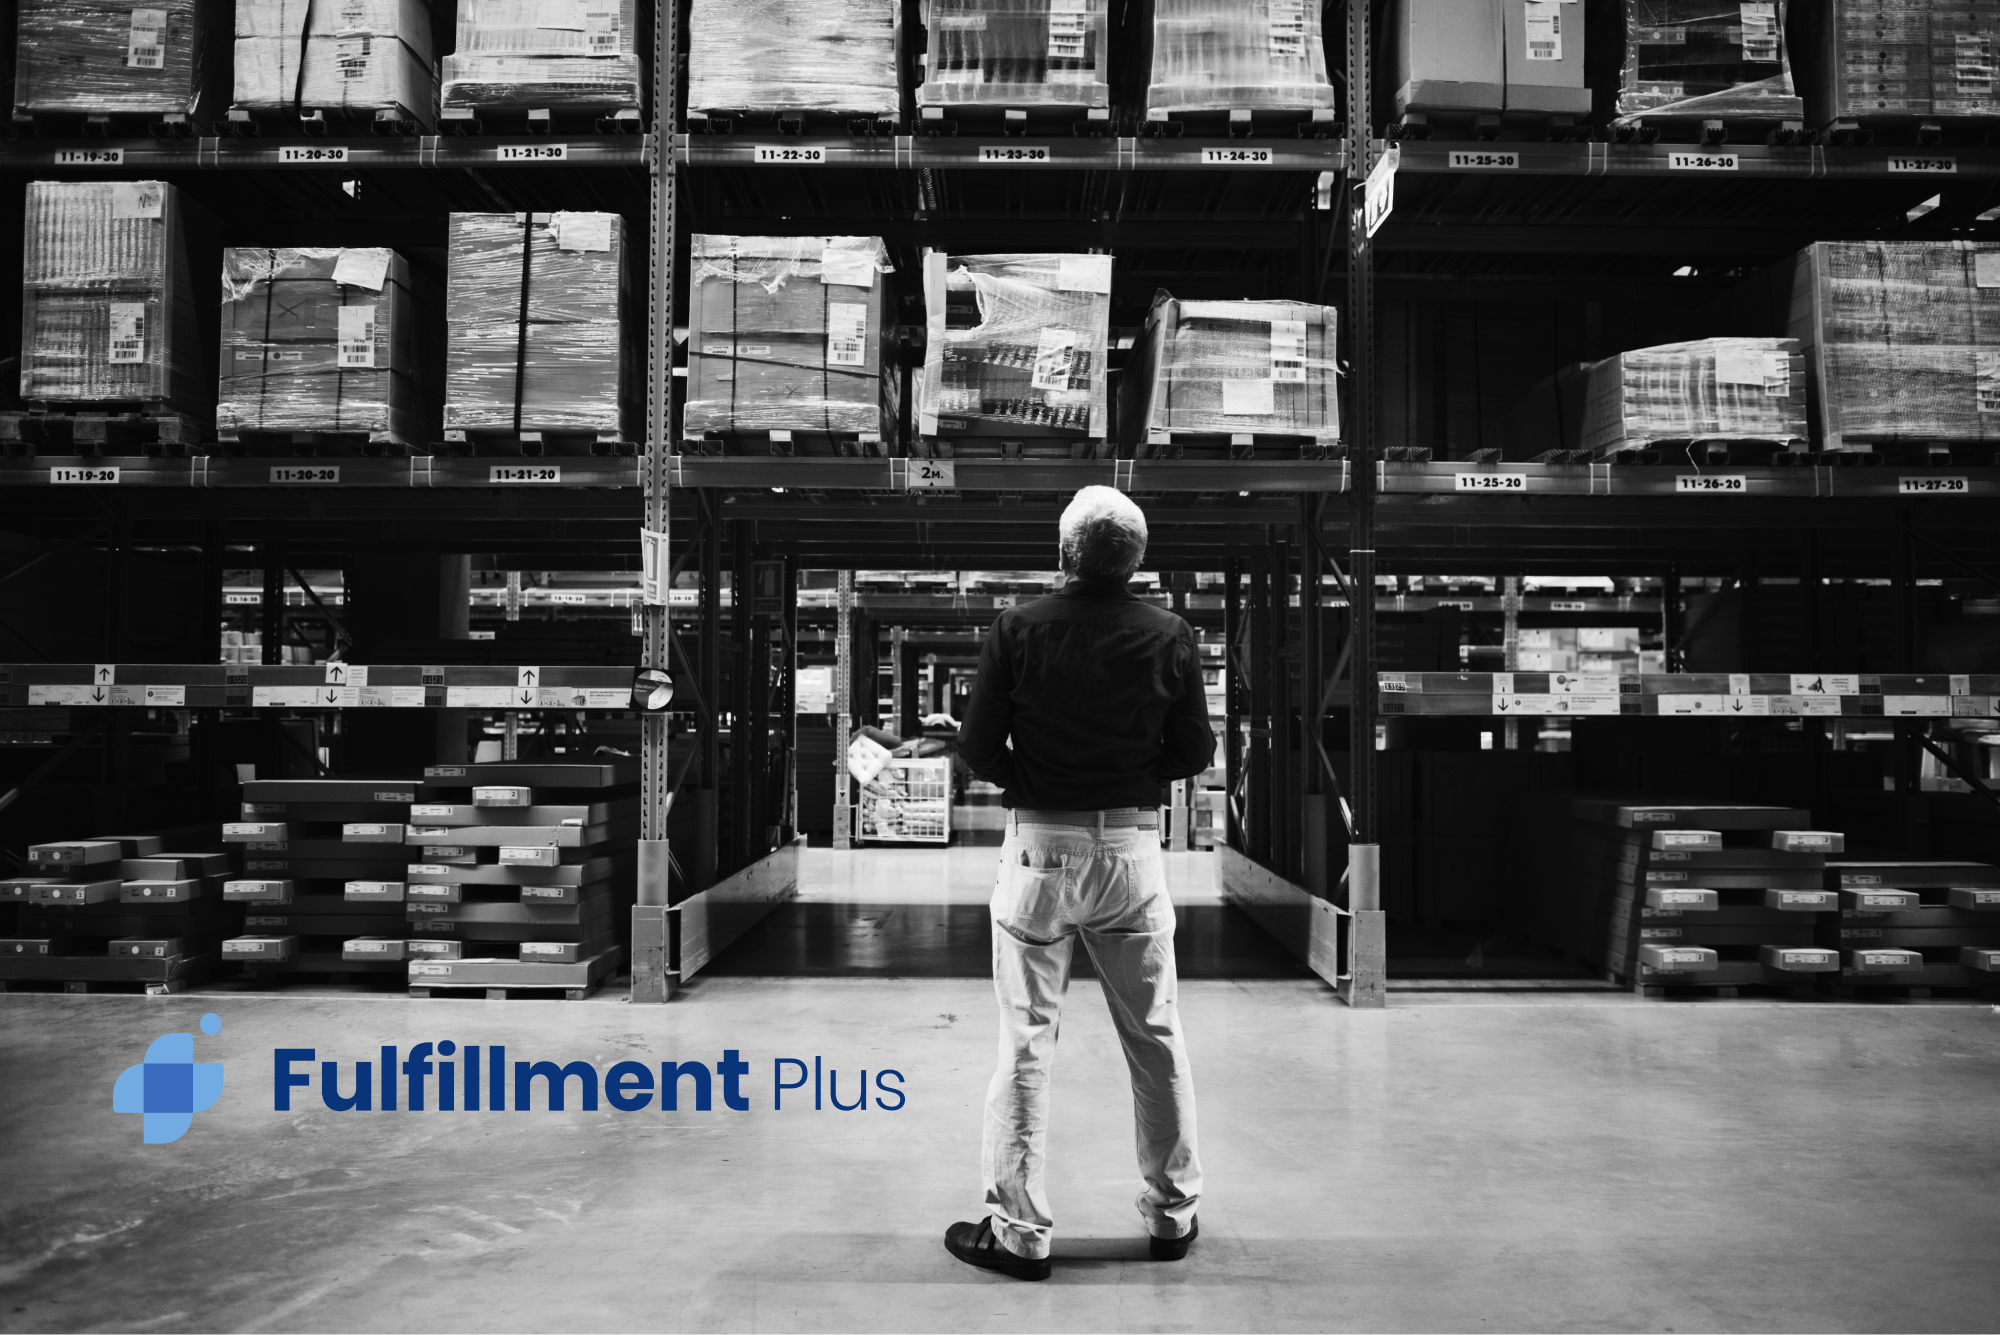 Fulfillment center journey: manual past to automated present, with a look at AI, robotics, and sustainable future.